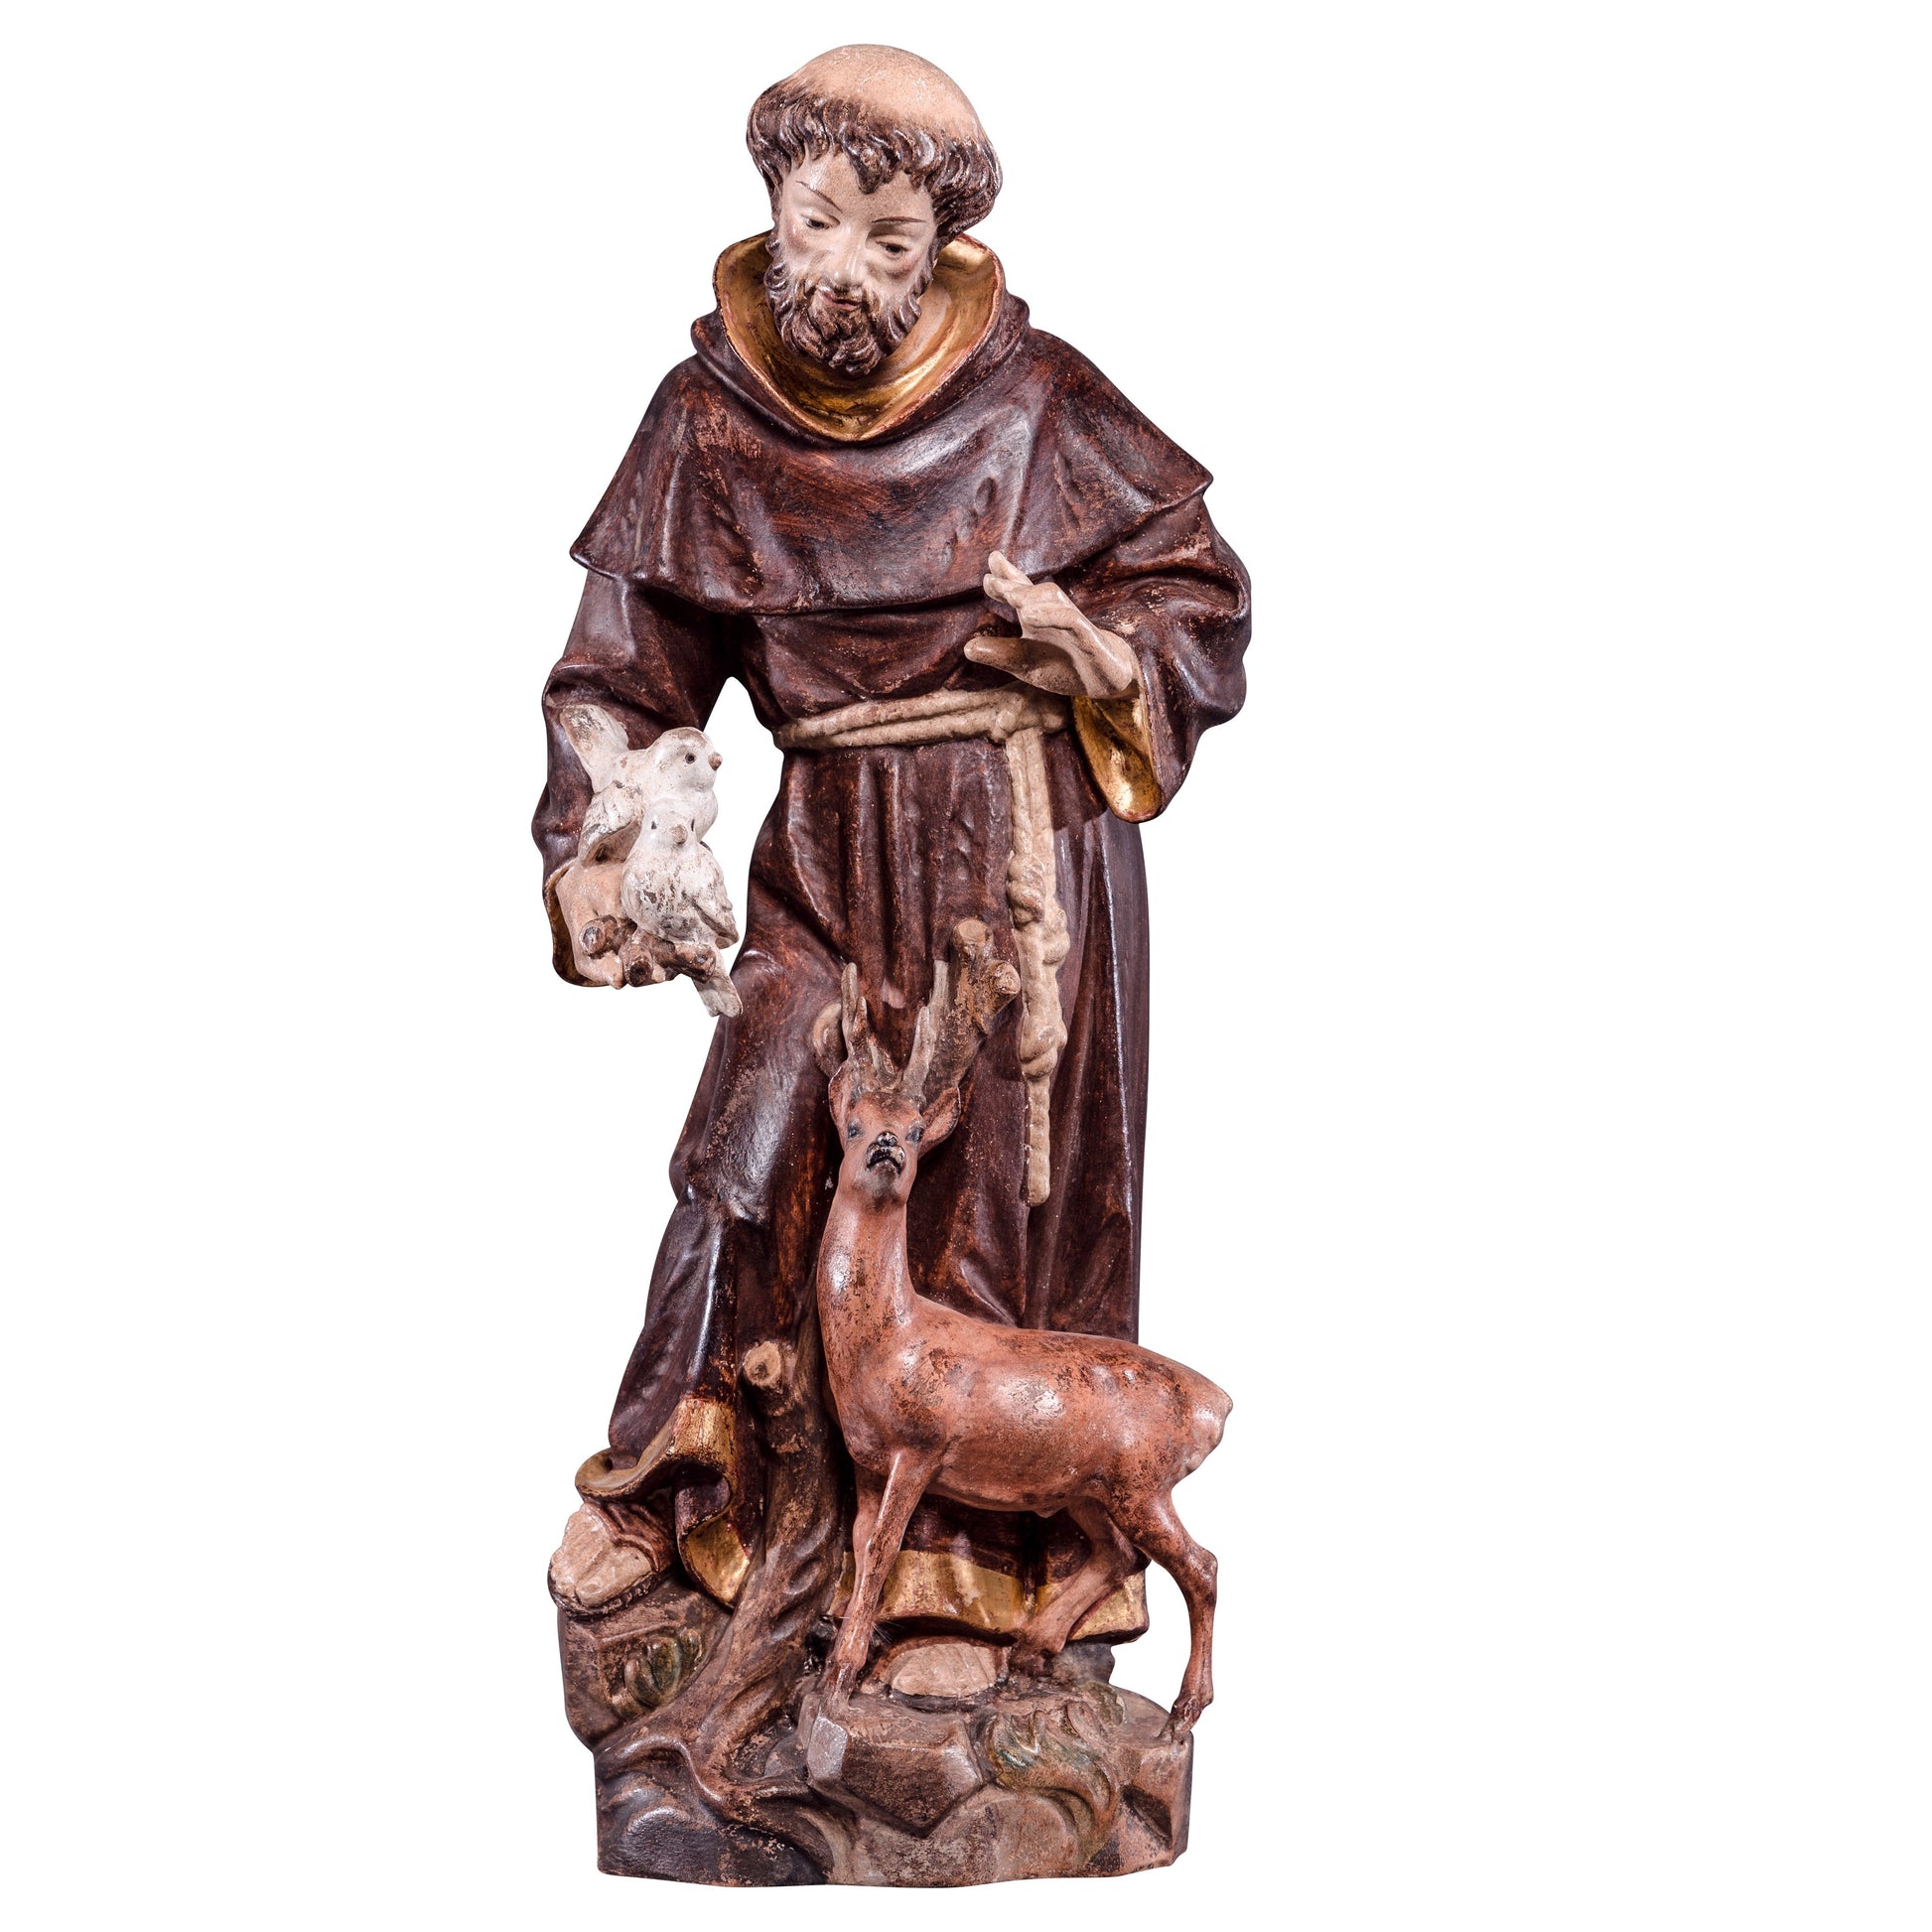 Mondo Cattolico Golden / 30 cm (11.8 in) Wooden statue of St. Francis